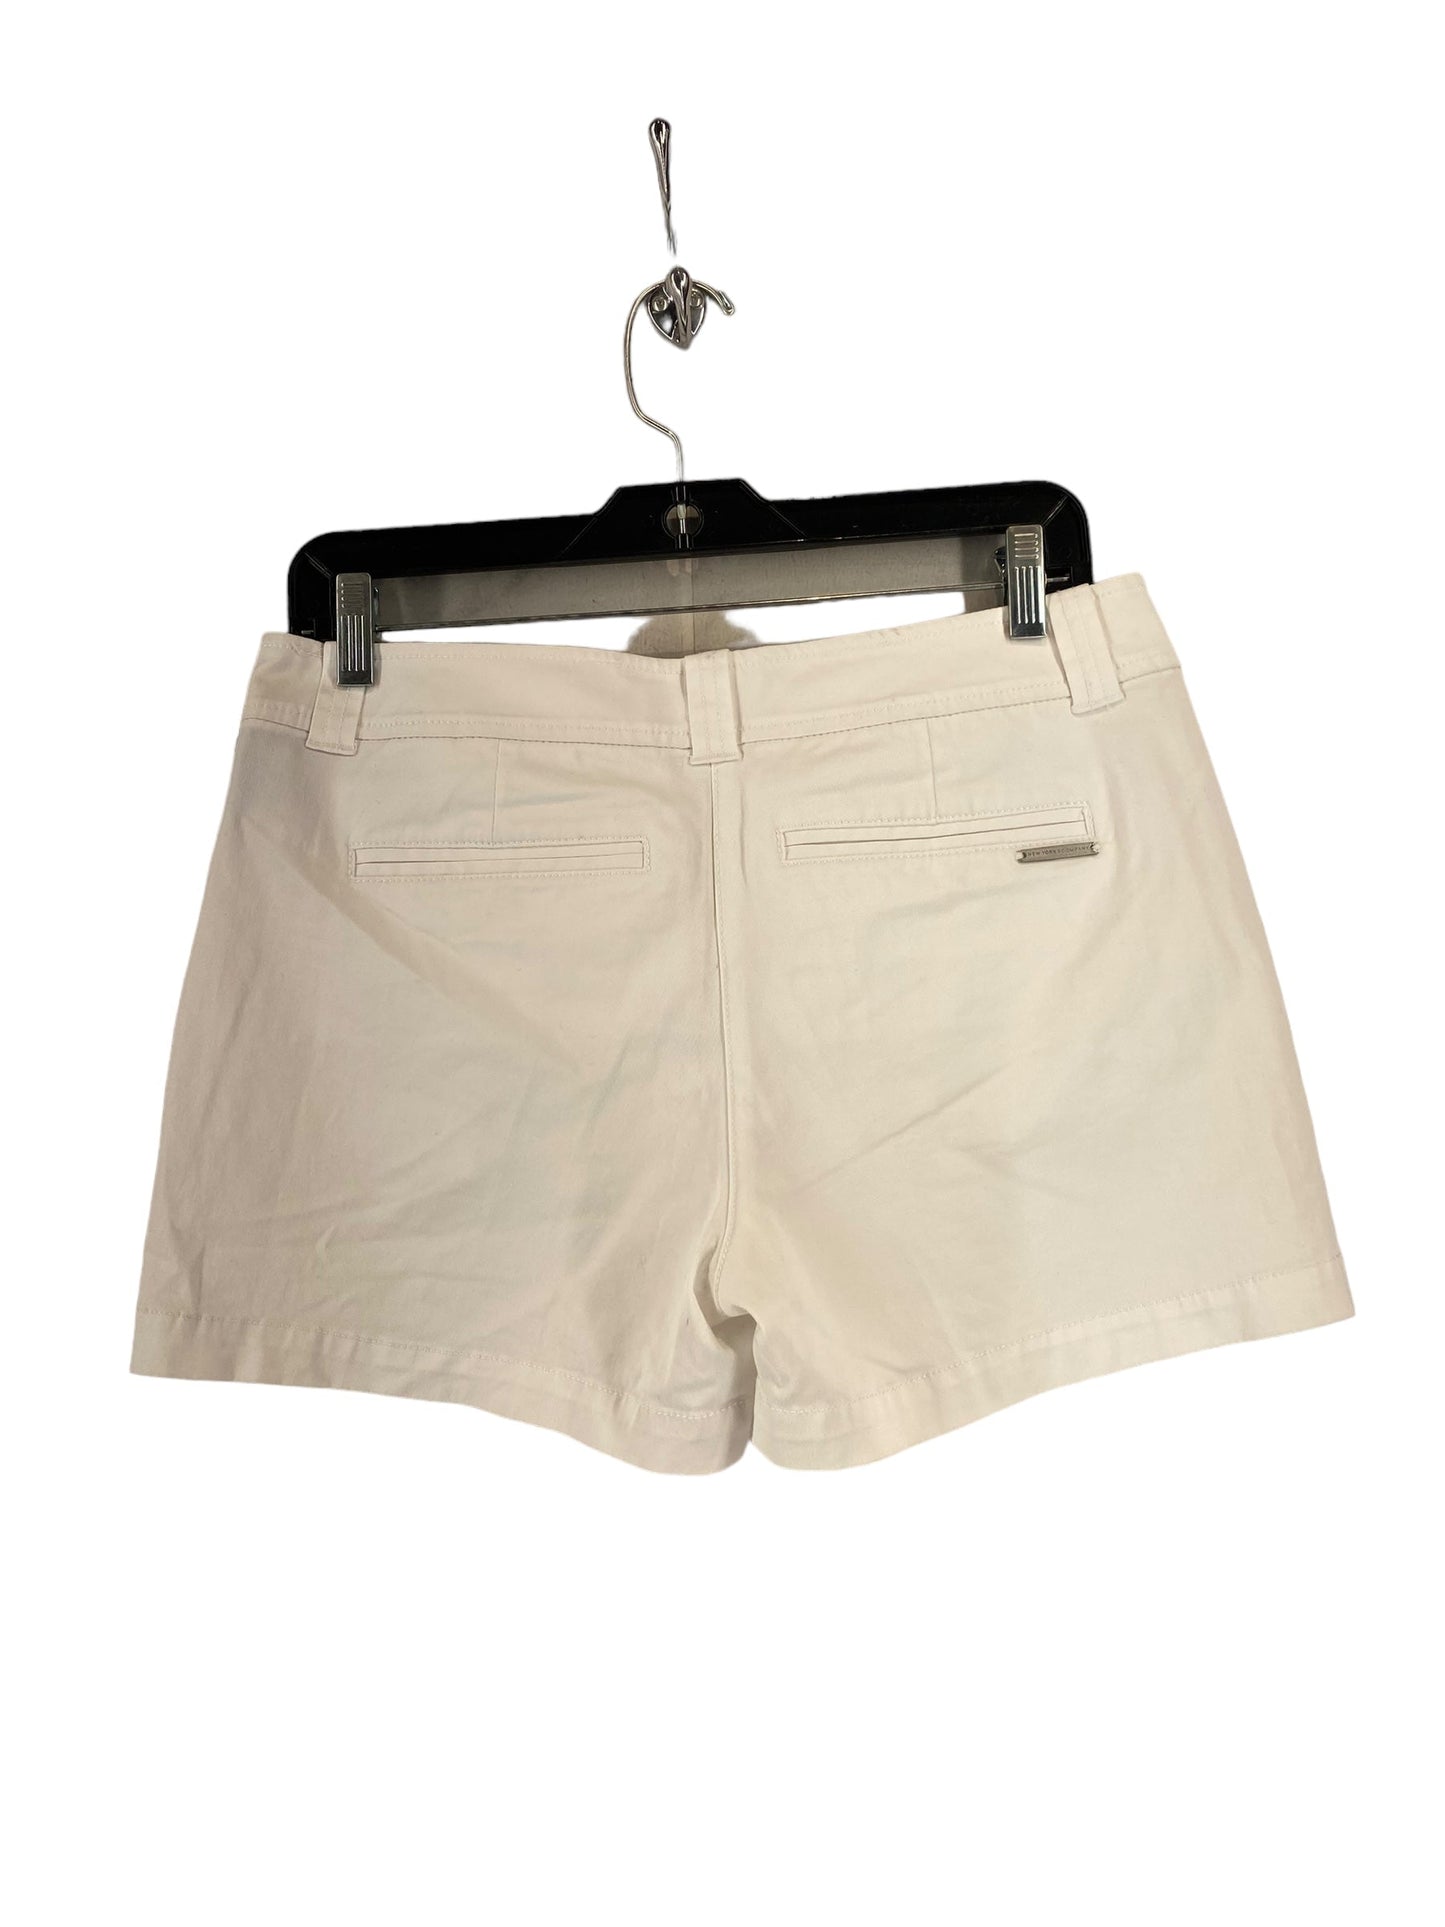 White Shorts New York And Co, Size 4